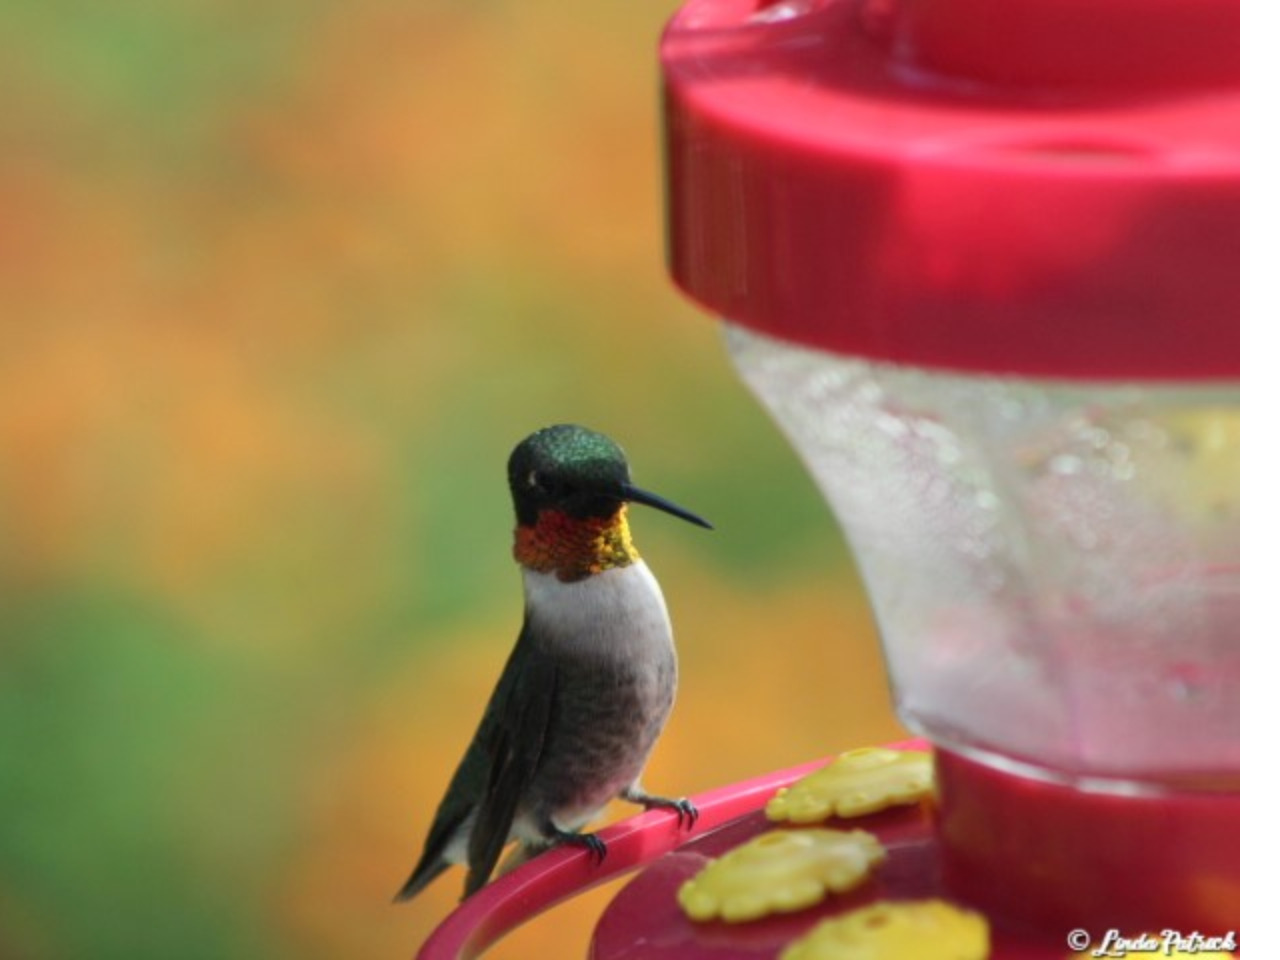 Ruby-throated adult male hummingbird at feeder